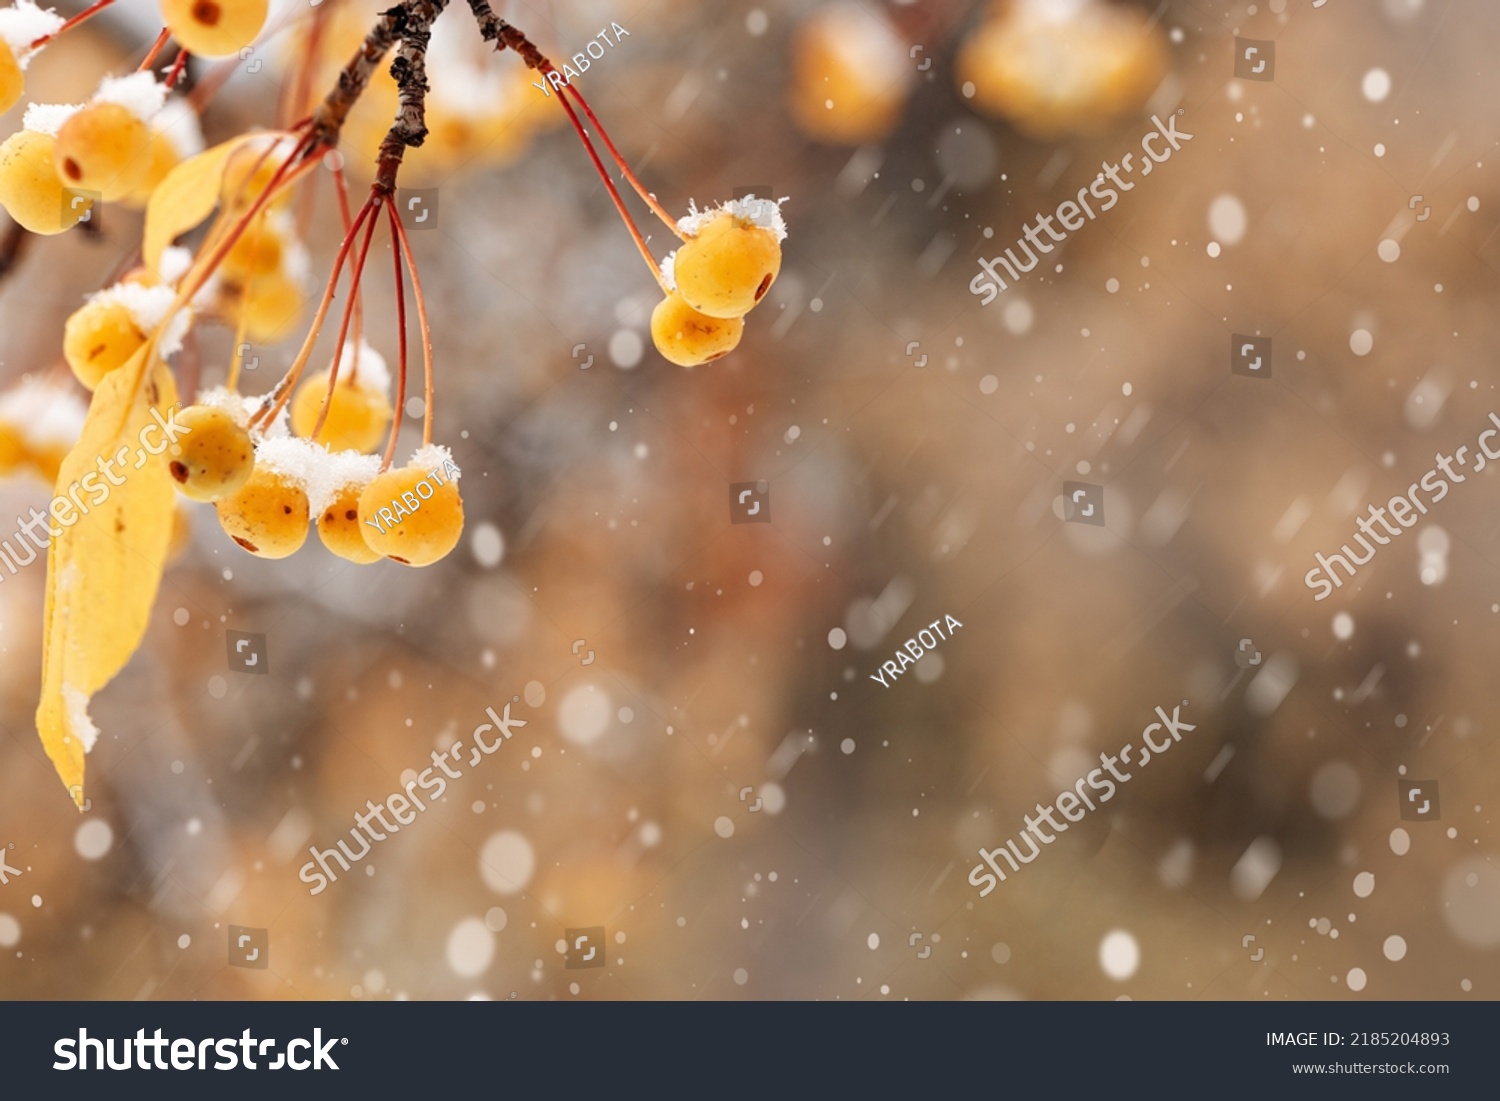 Small yellow apples on branches tree with snow. Winter or late autumn scene, beautiful nature with wild frozen berries on blurred dark background. Winer season apple trees close up and snowing #2185204893